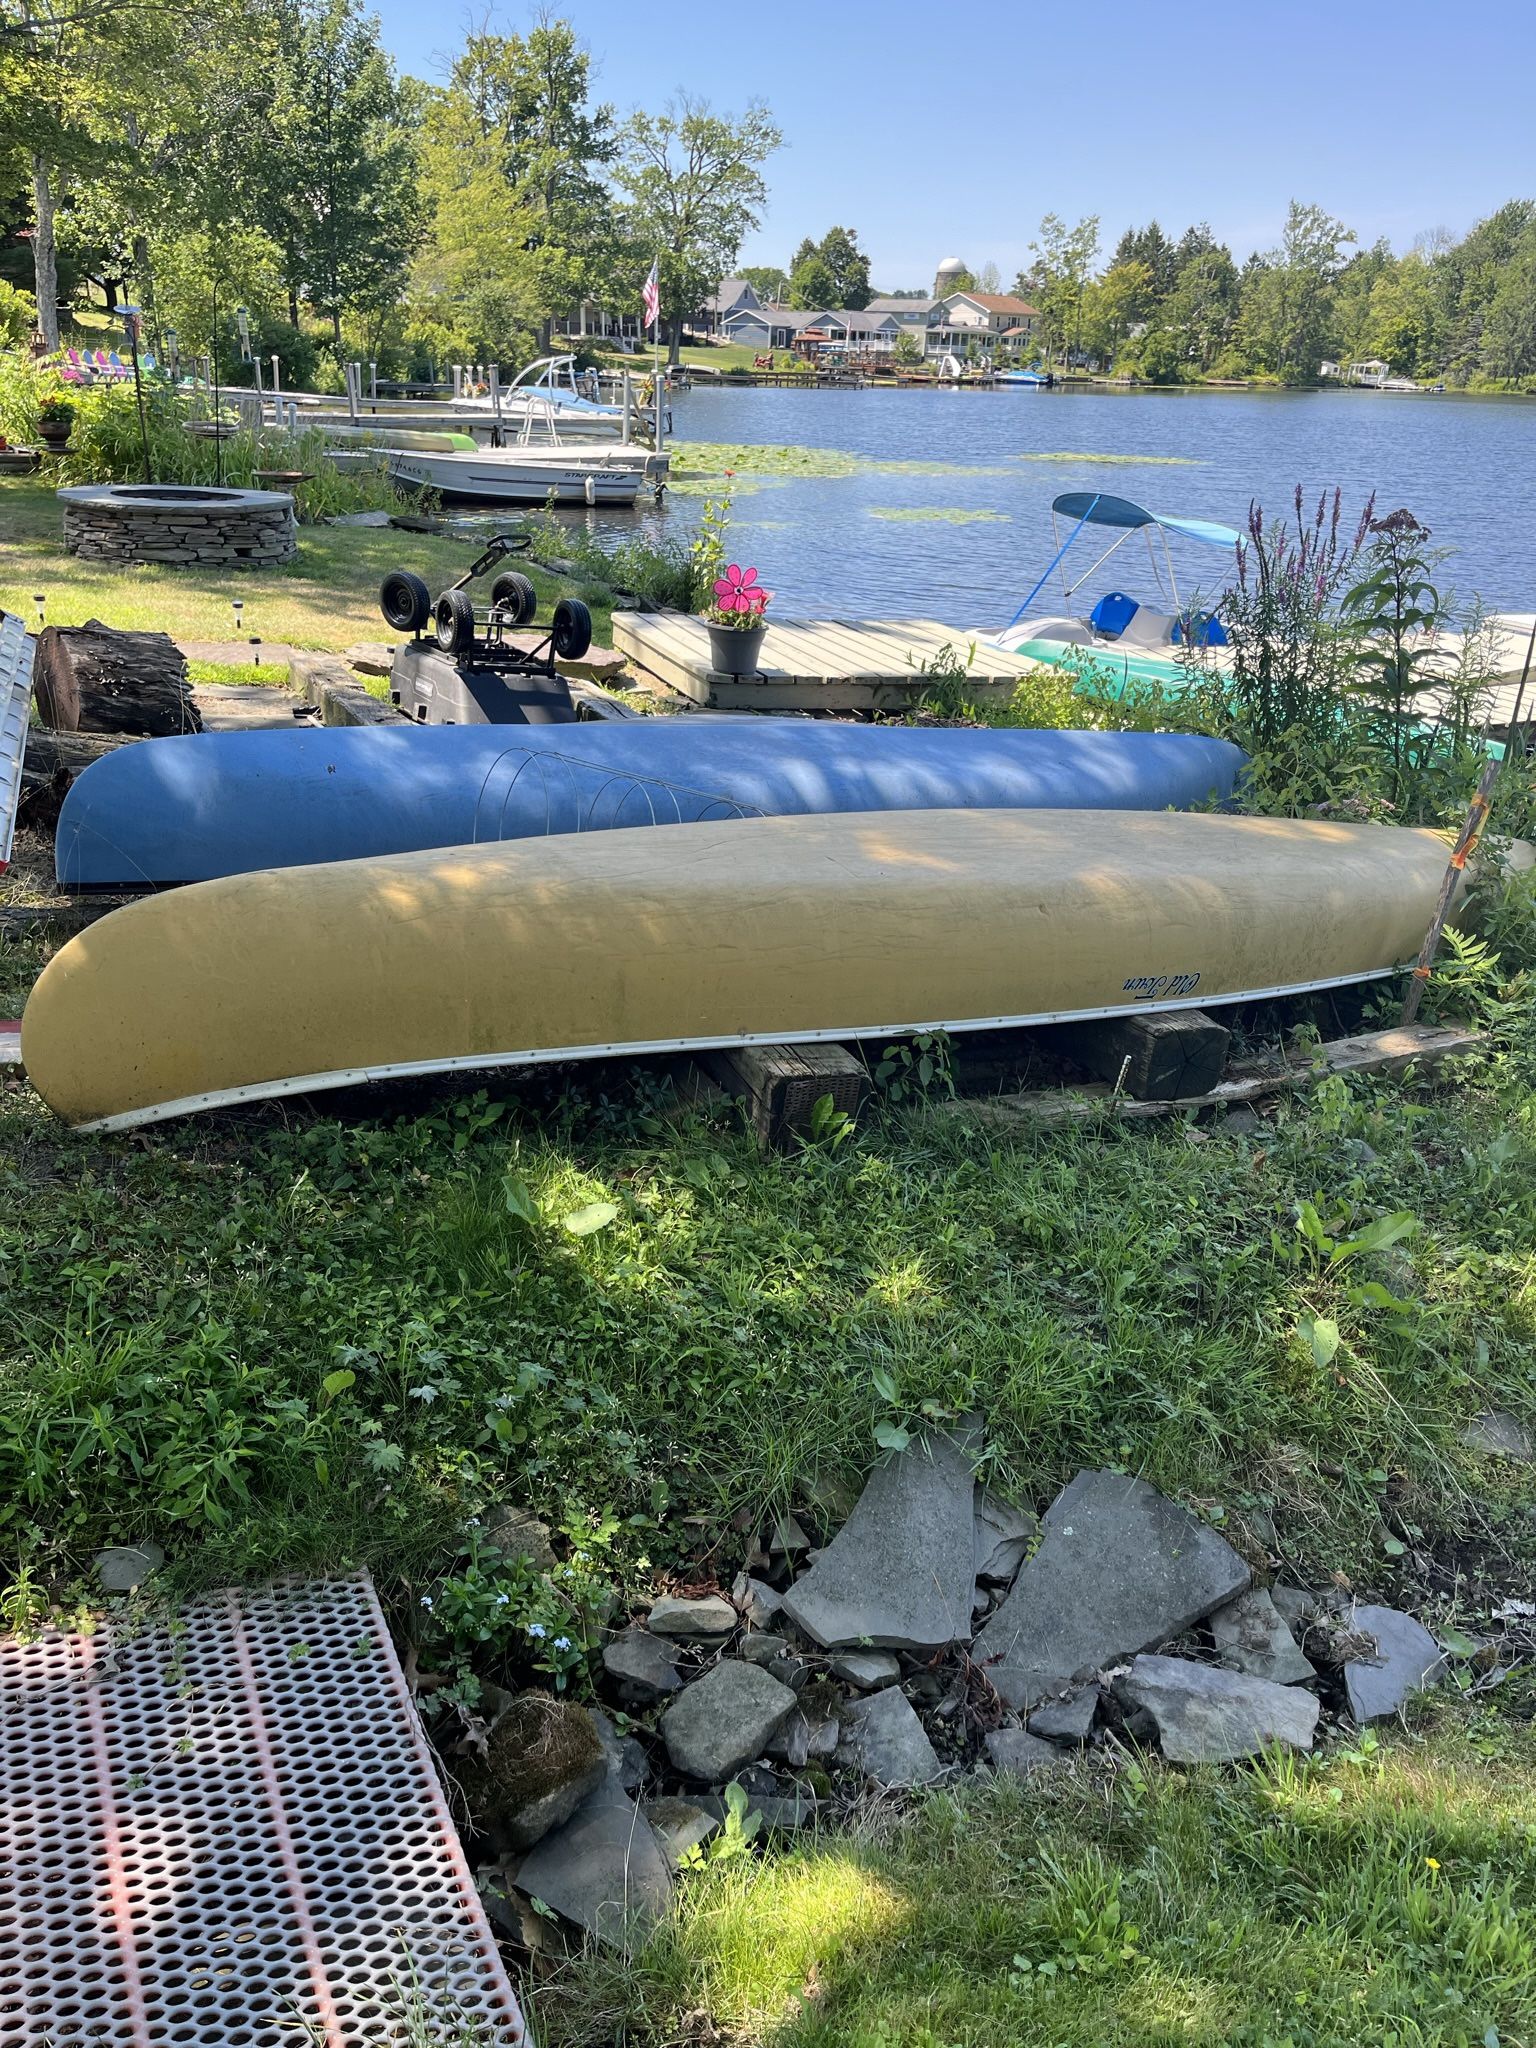 16 Ft. Old town Yellow Canoe With Paddles